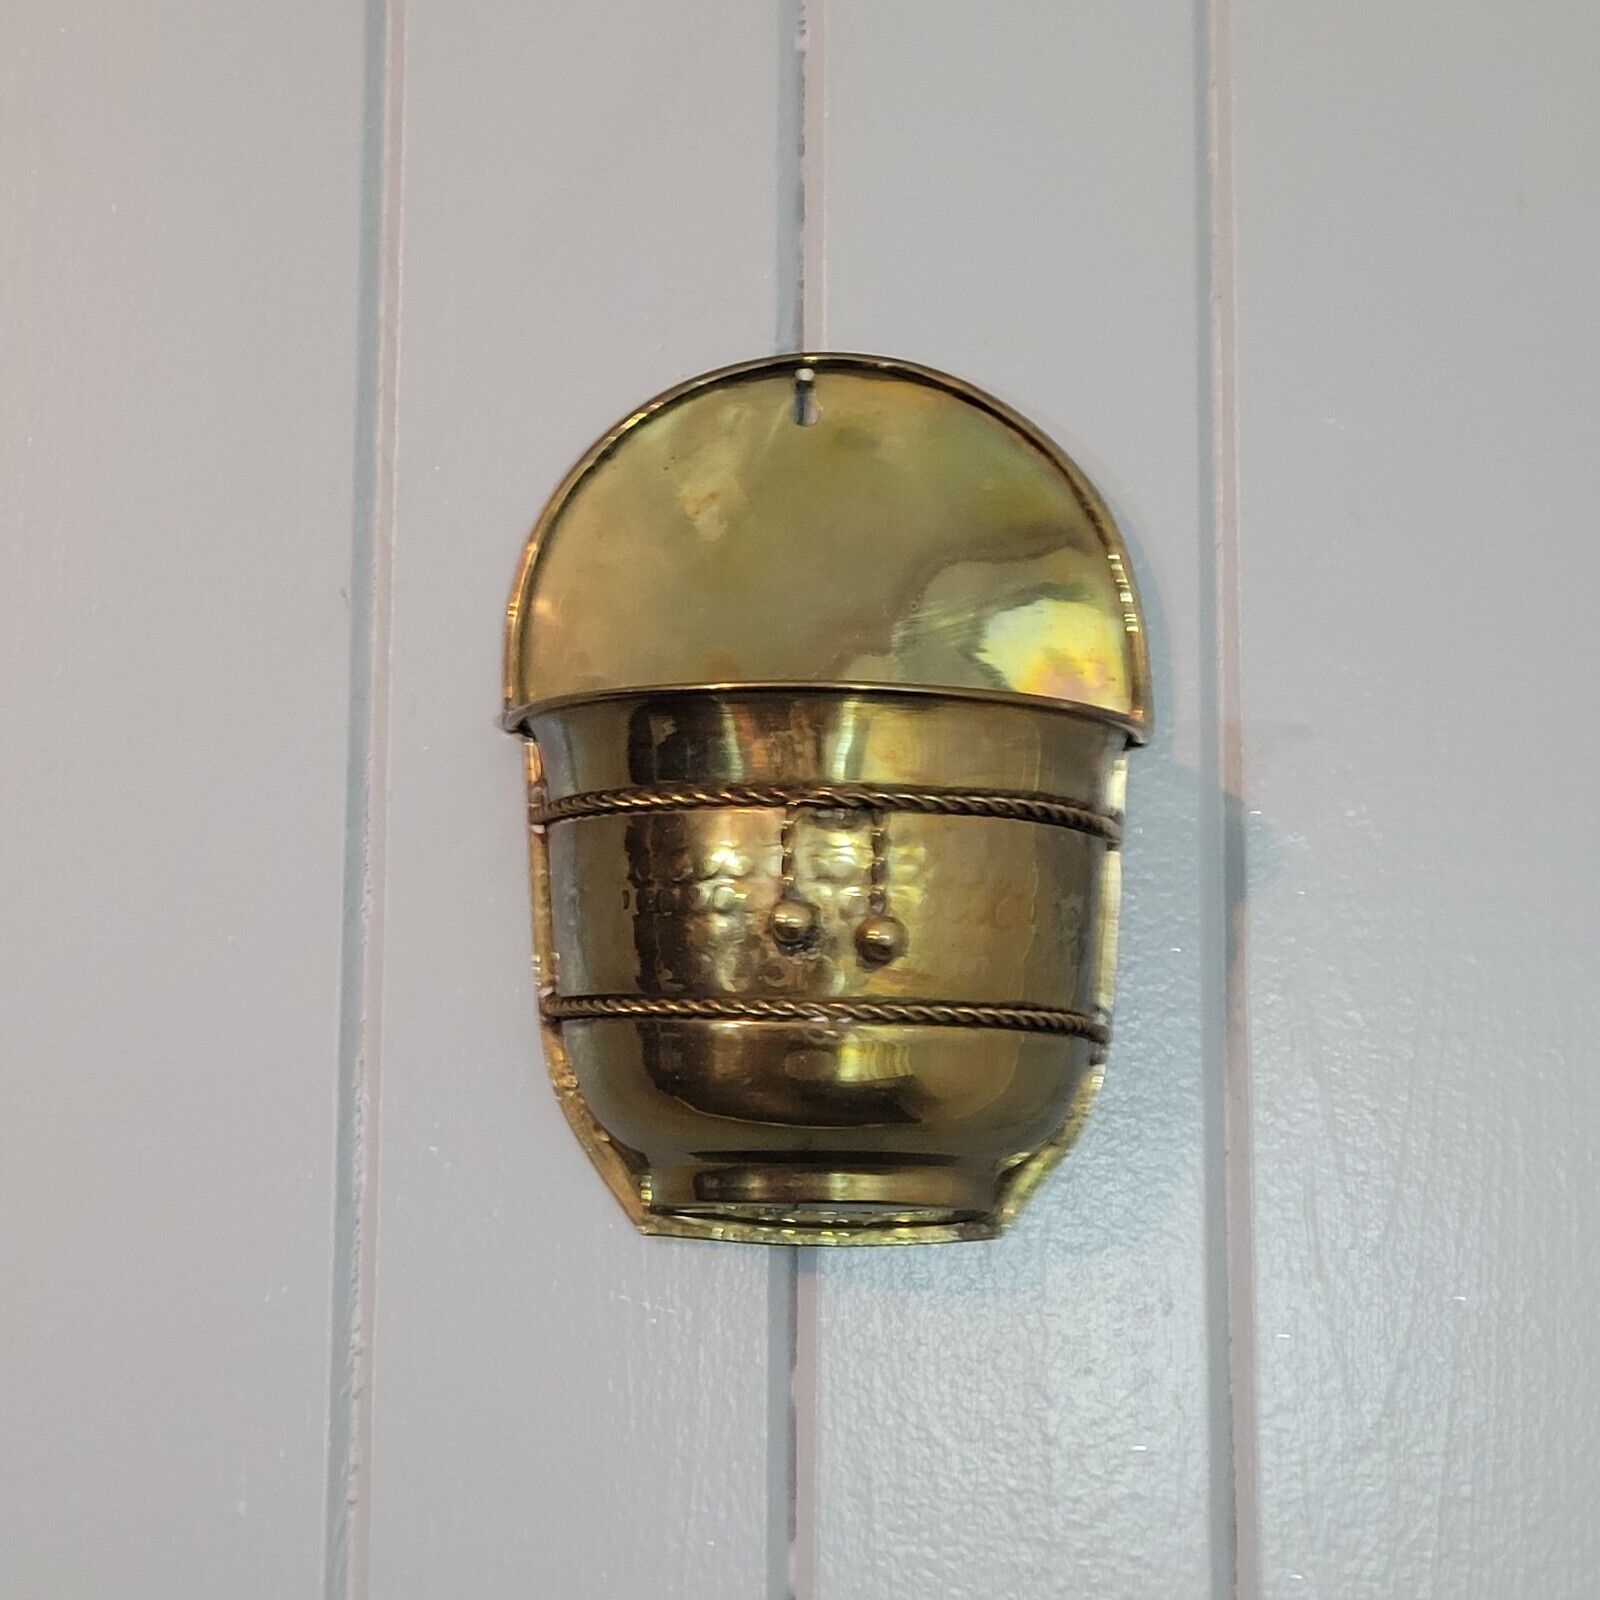 VTG Solid Brass Wall Planter with Rope Detailing & Tassel Accents, Indoor Garden